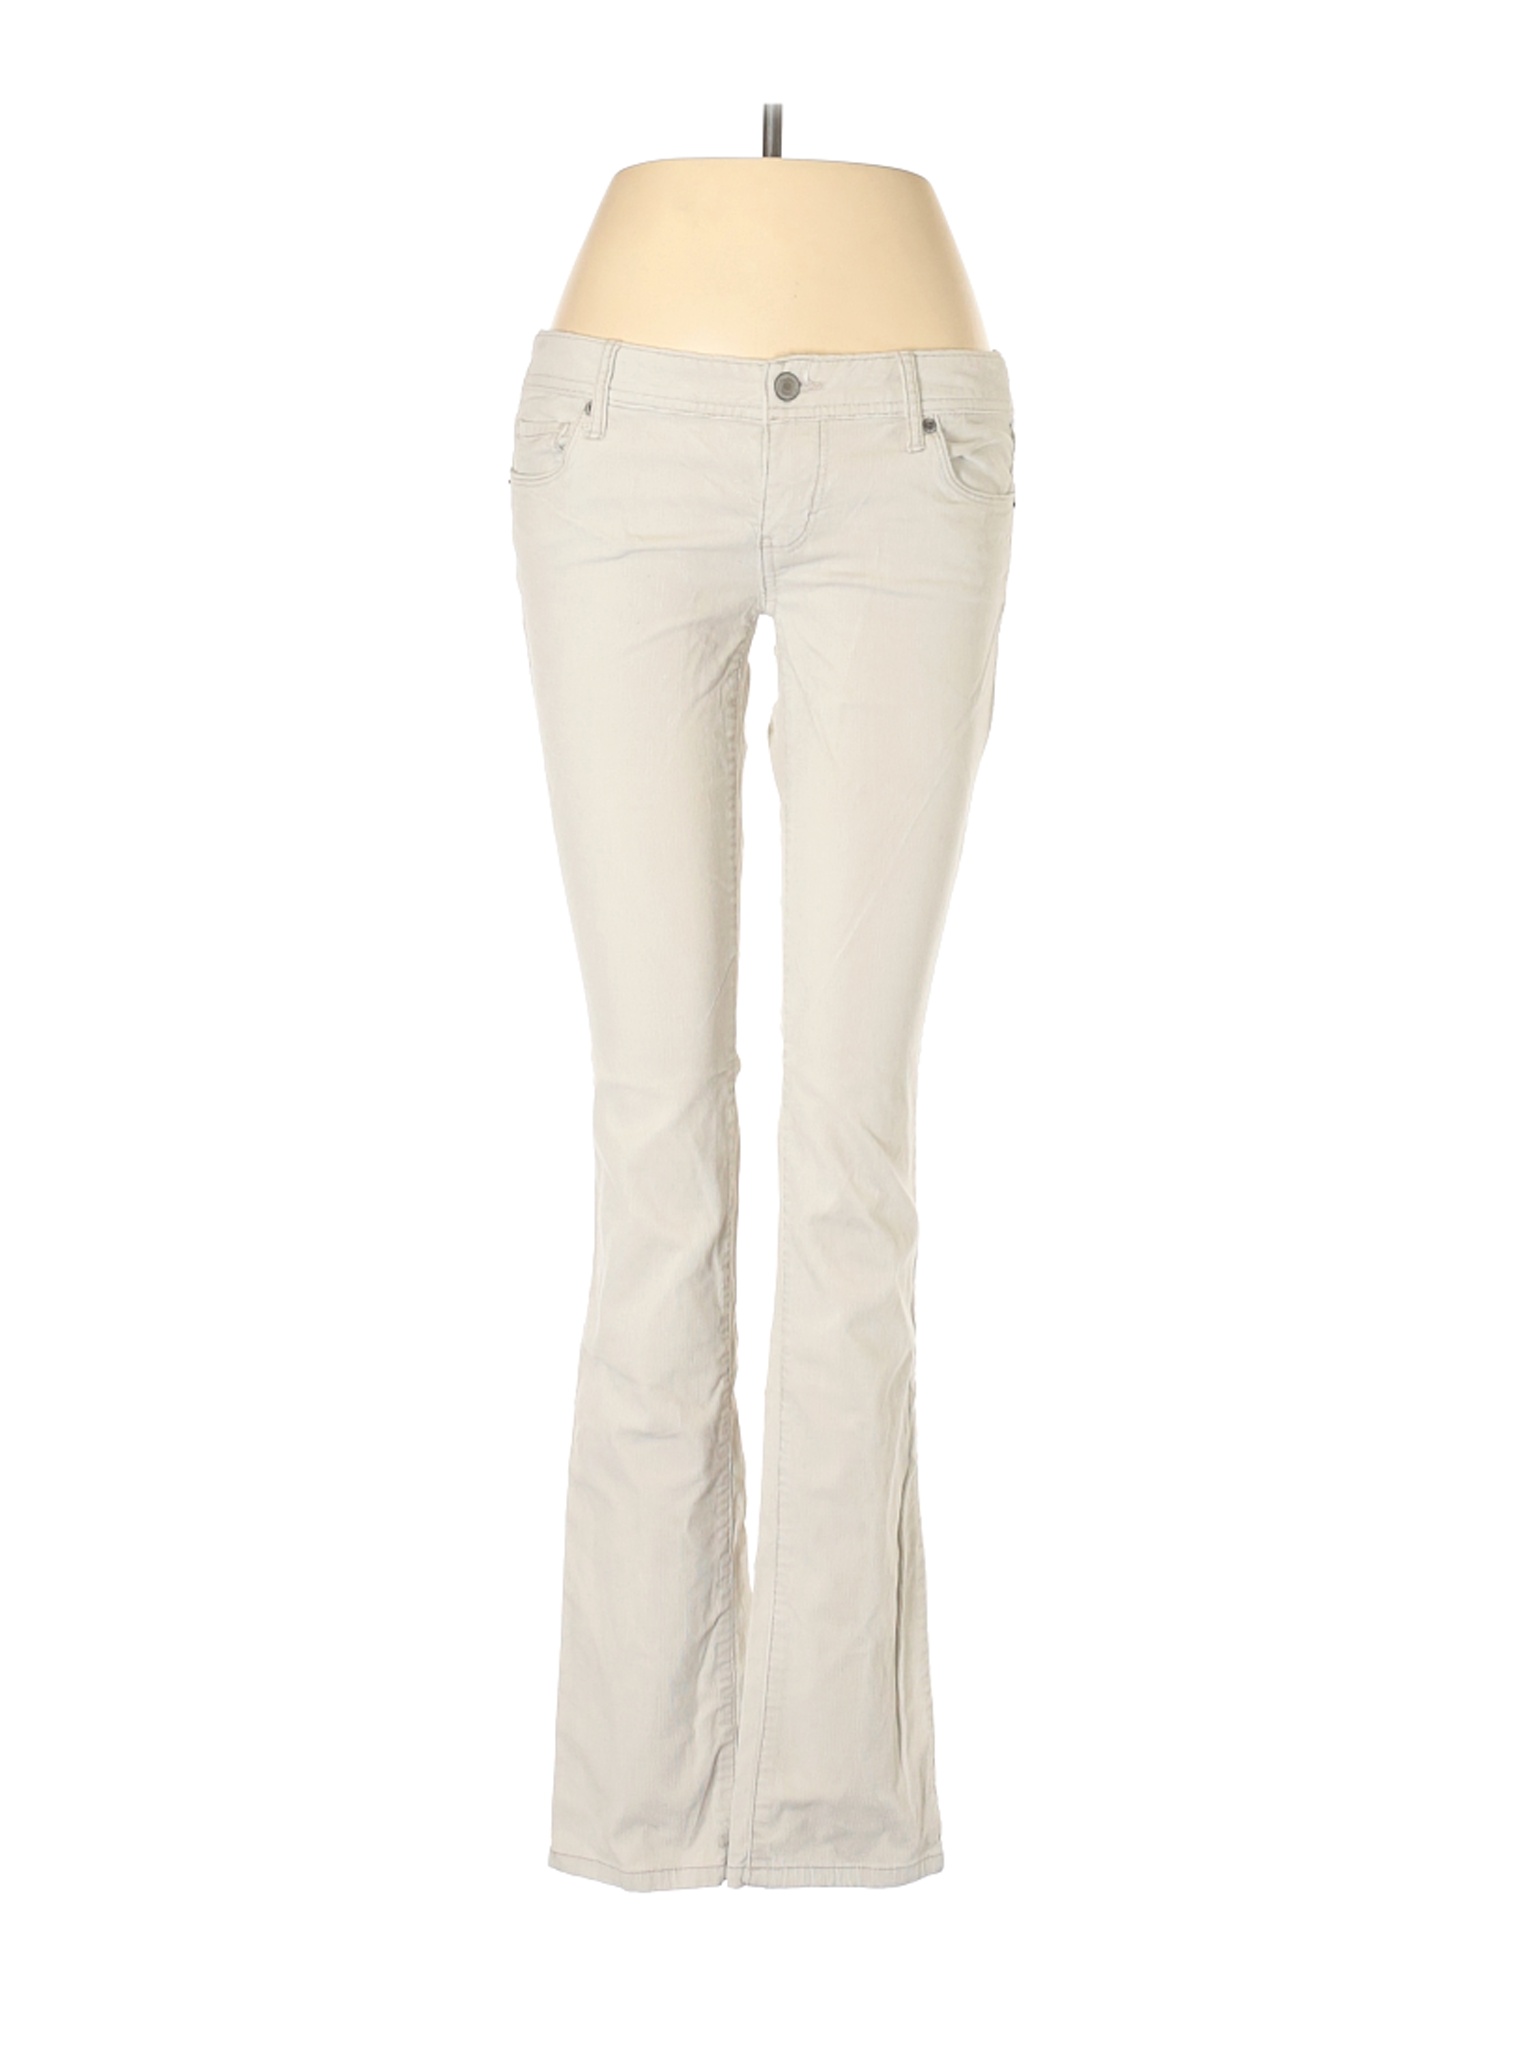 American Eagle Outfitters Women Ivory Jeans 20 Plus | eBay